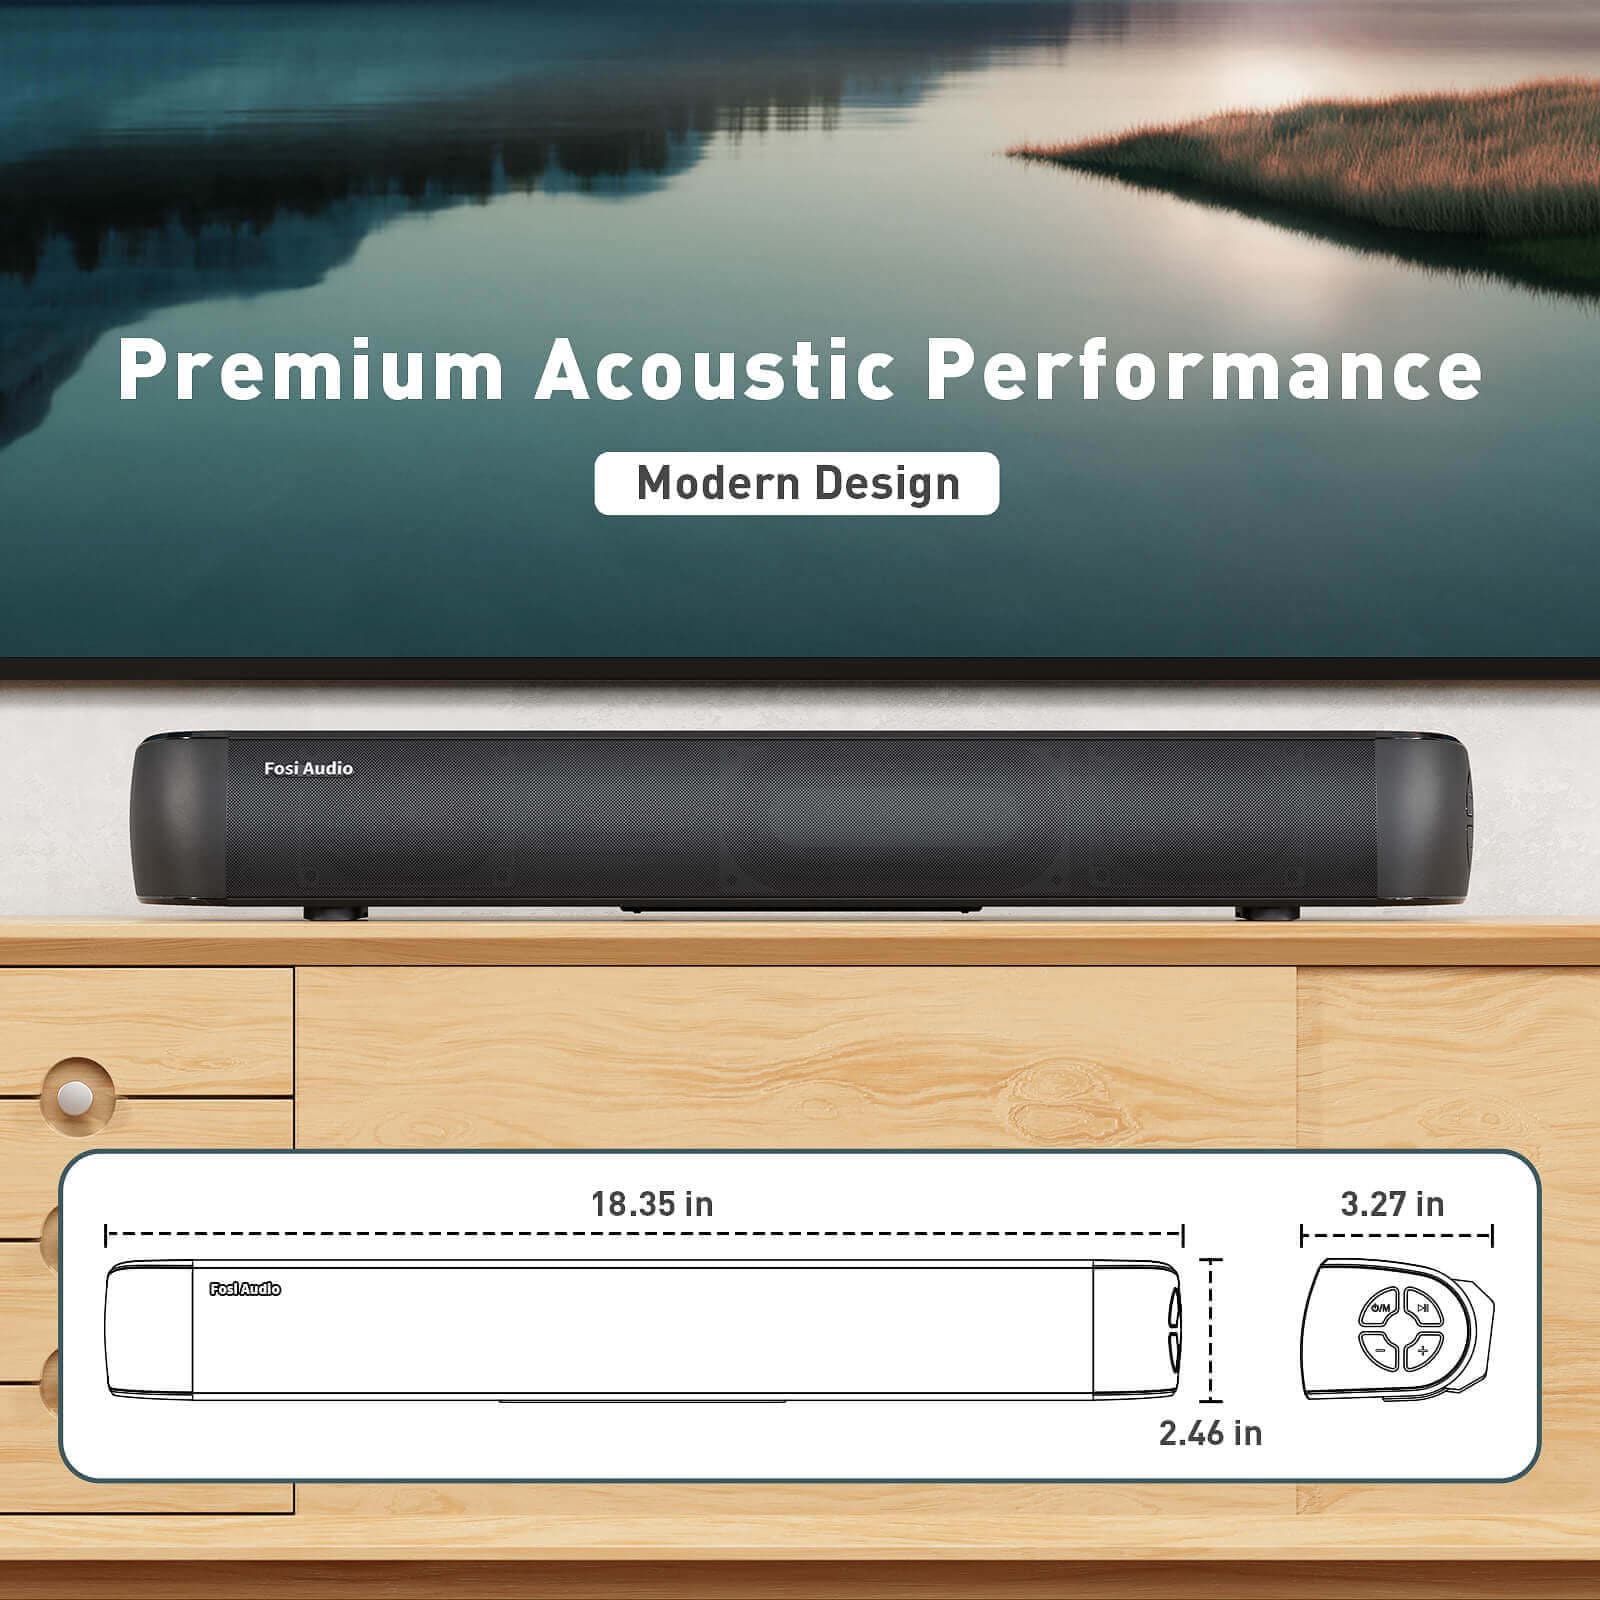 Fosi Audio Bluetooth Sound Bars for TV, 18.35-Inch Small Sound Bar with 5 EQ Modes & Built-in DSP, Bass Adjustable via Remote, HDMI ARC/Wireless/Optical/Aux/USB Connection, Wall Mountable TV Soundbar